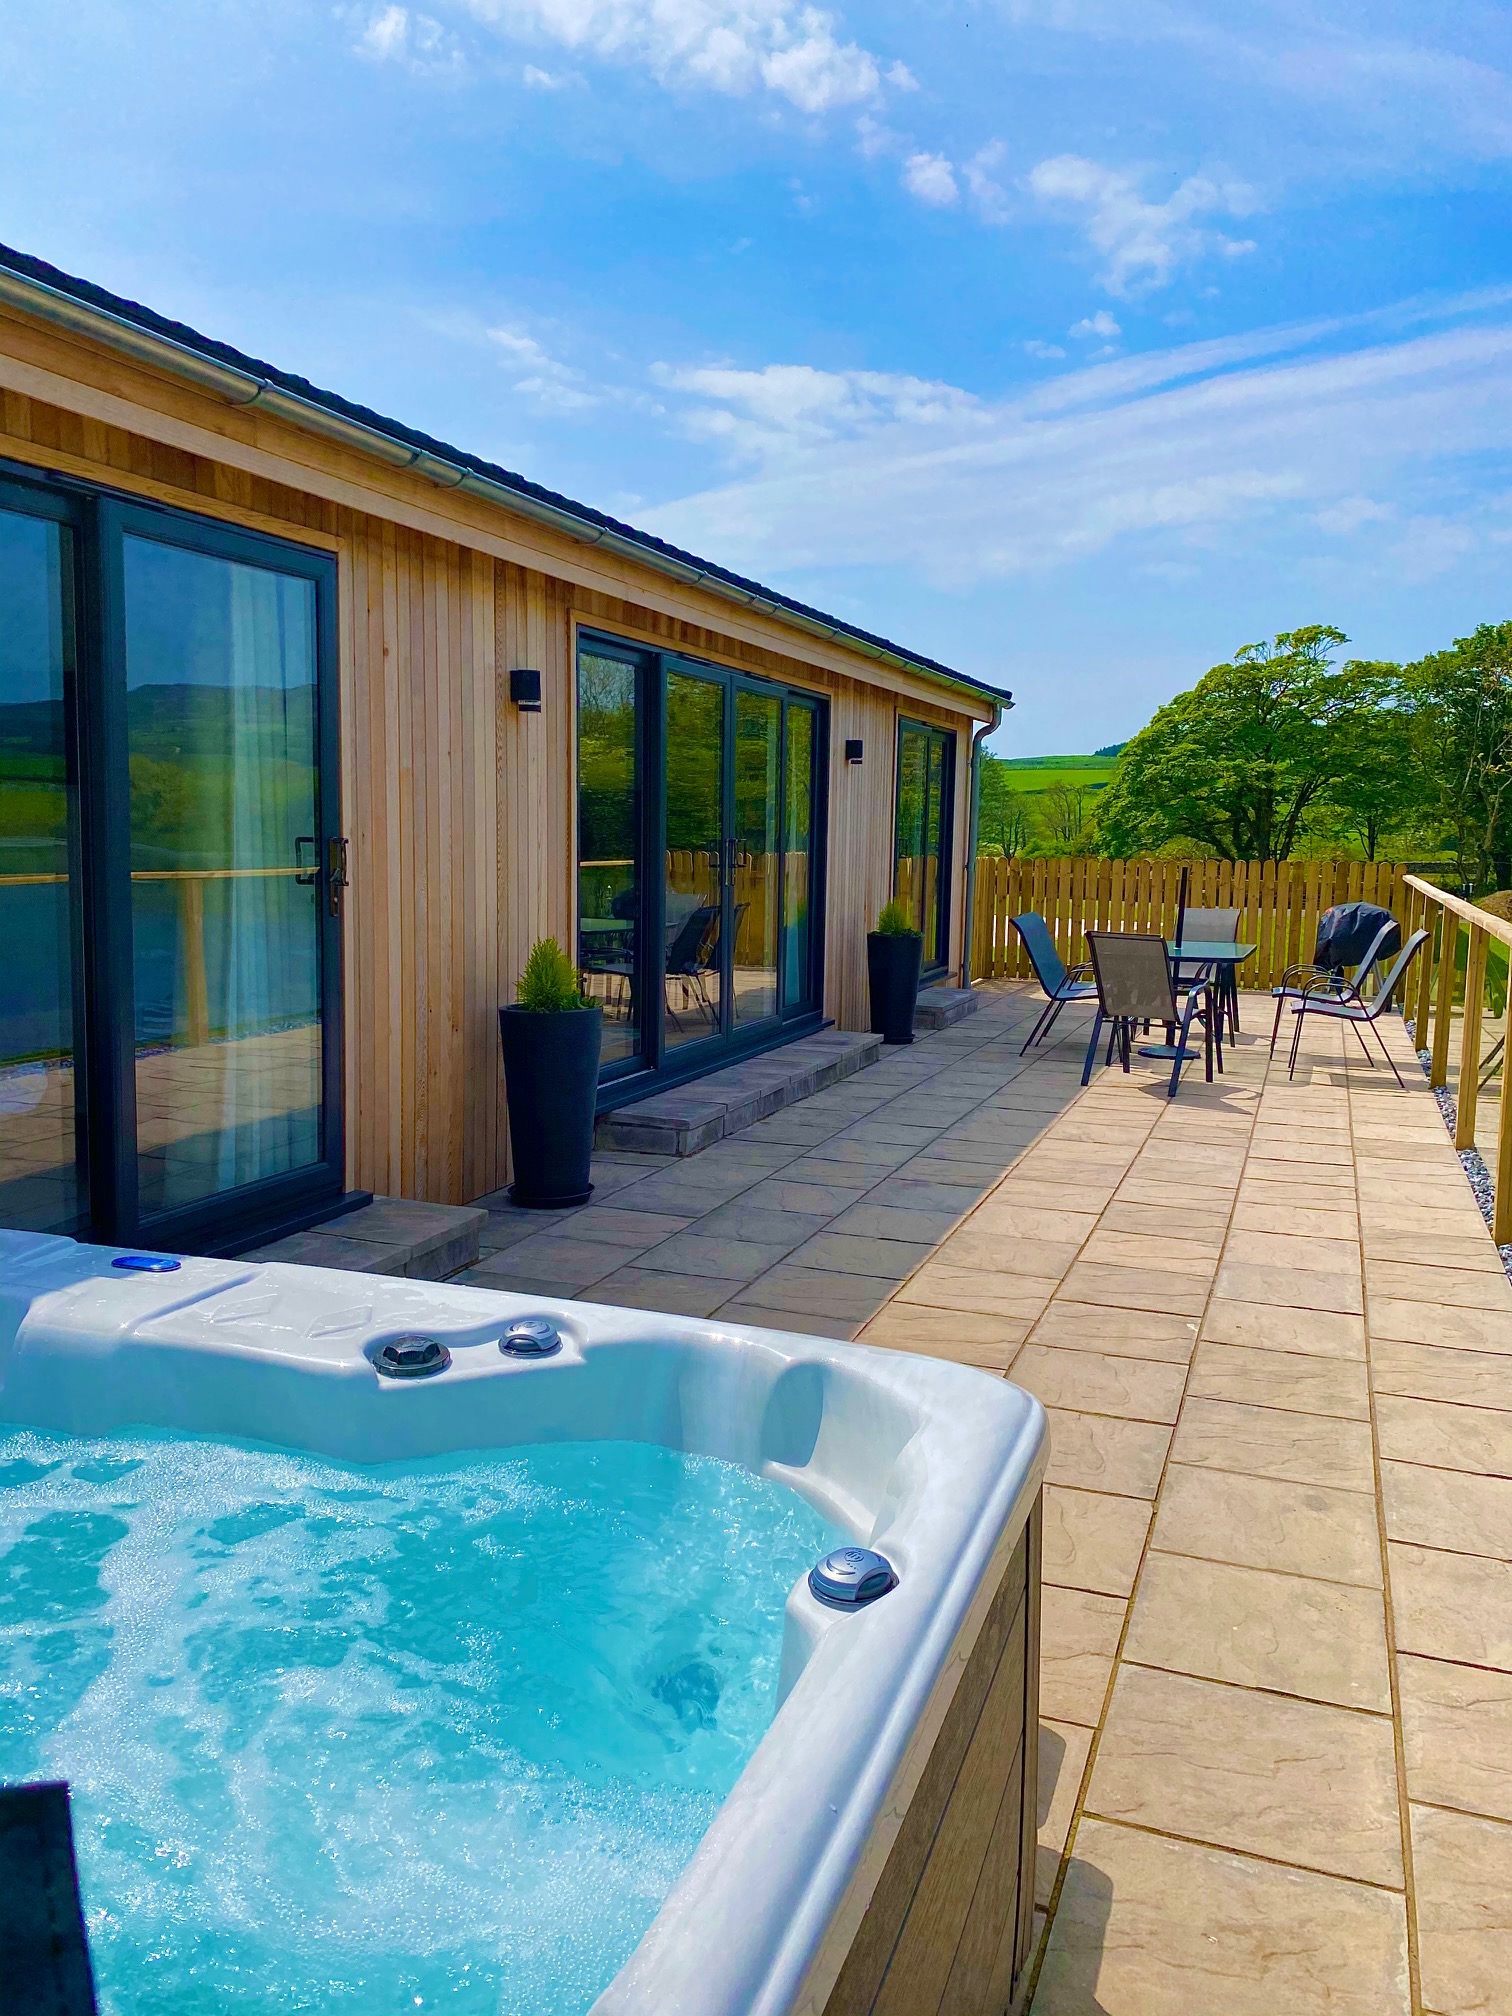 Bengairn Country Lodges - Hot Tub